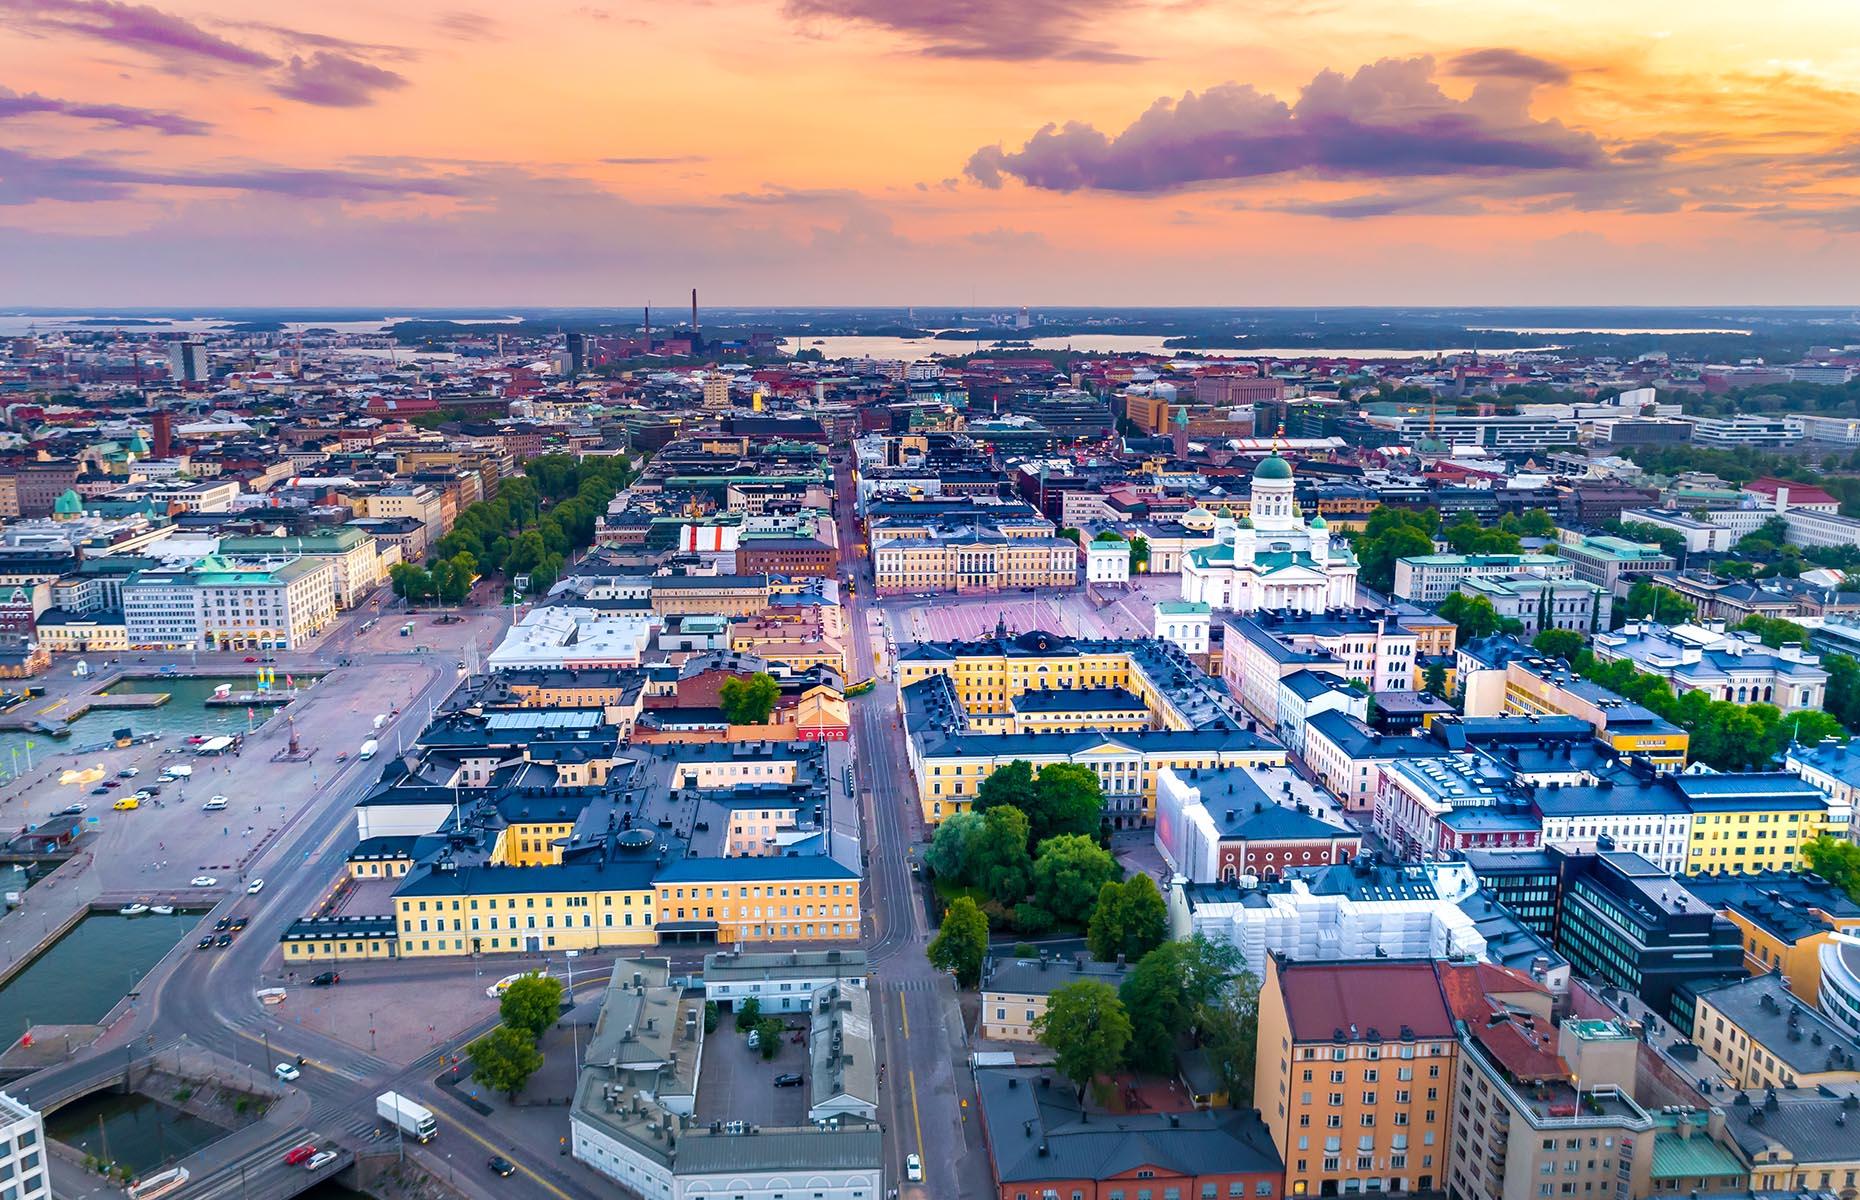 A Scandinavian capital, this pretty city is known for its plentiful offering of cool boutiques and hip designer hotels.